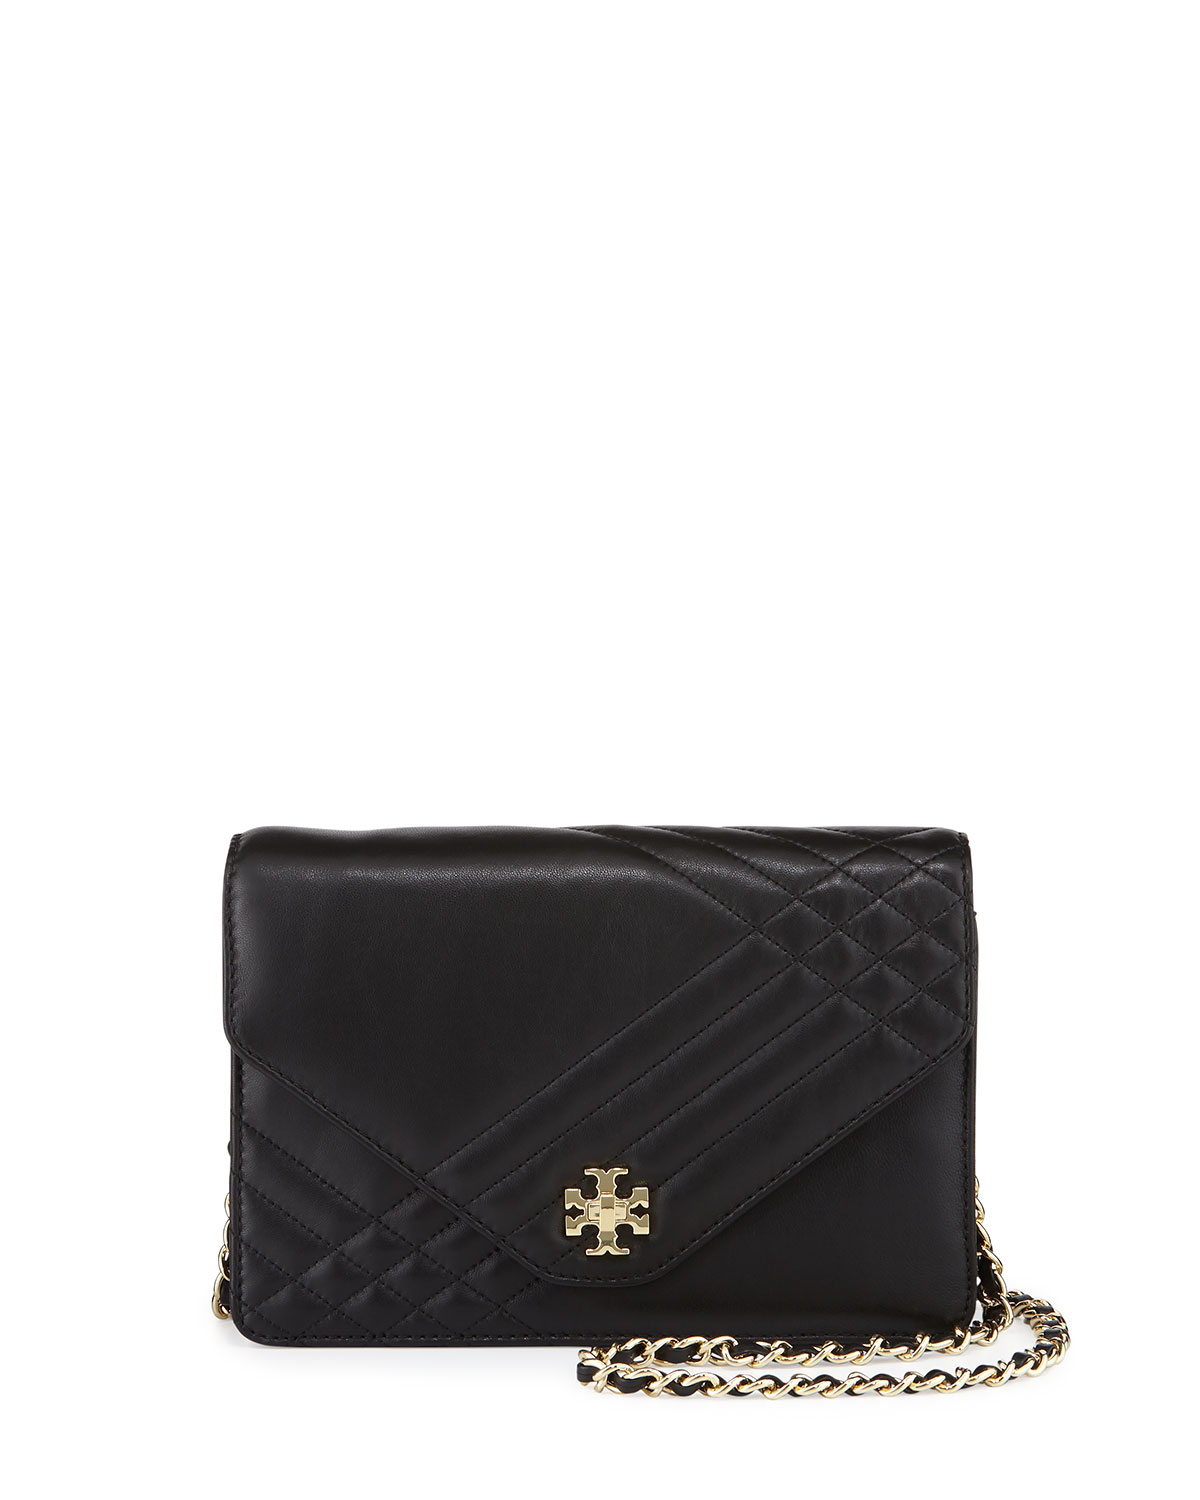 Tory Burch Kira Quilted Crossbody Bag in Black | Lyst